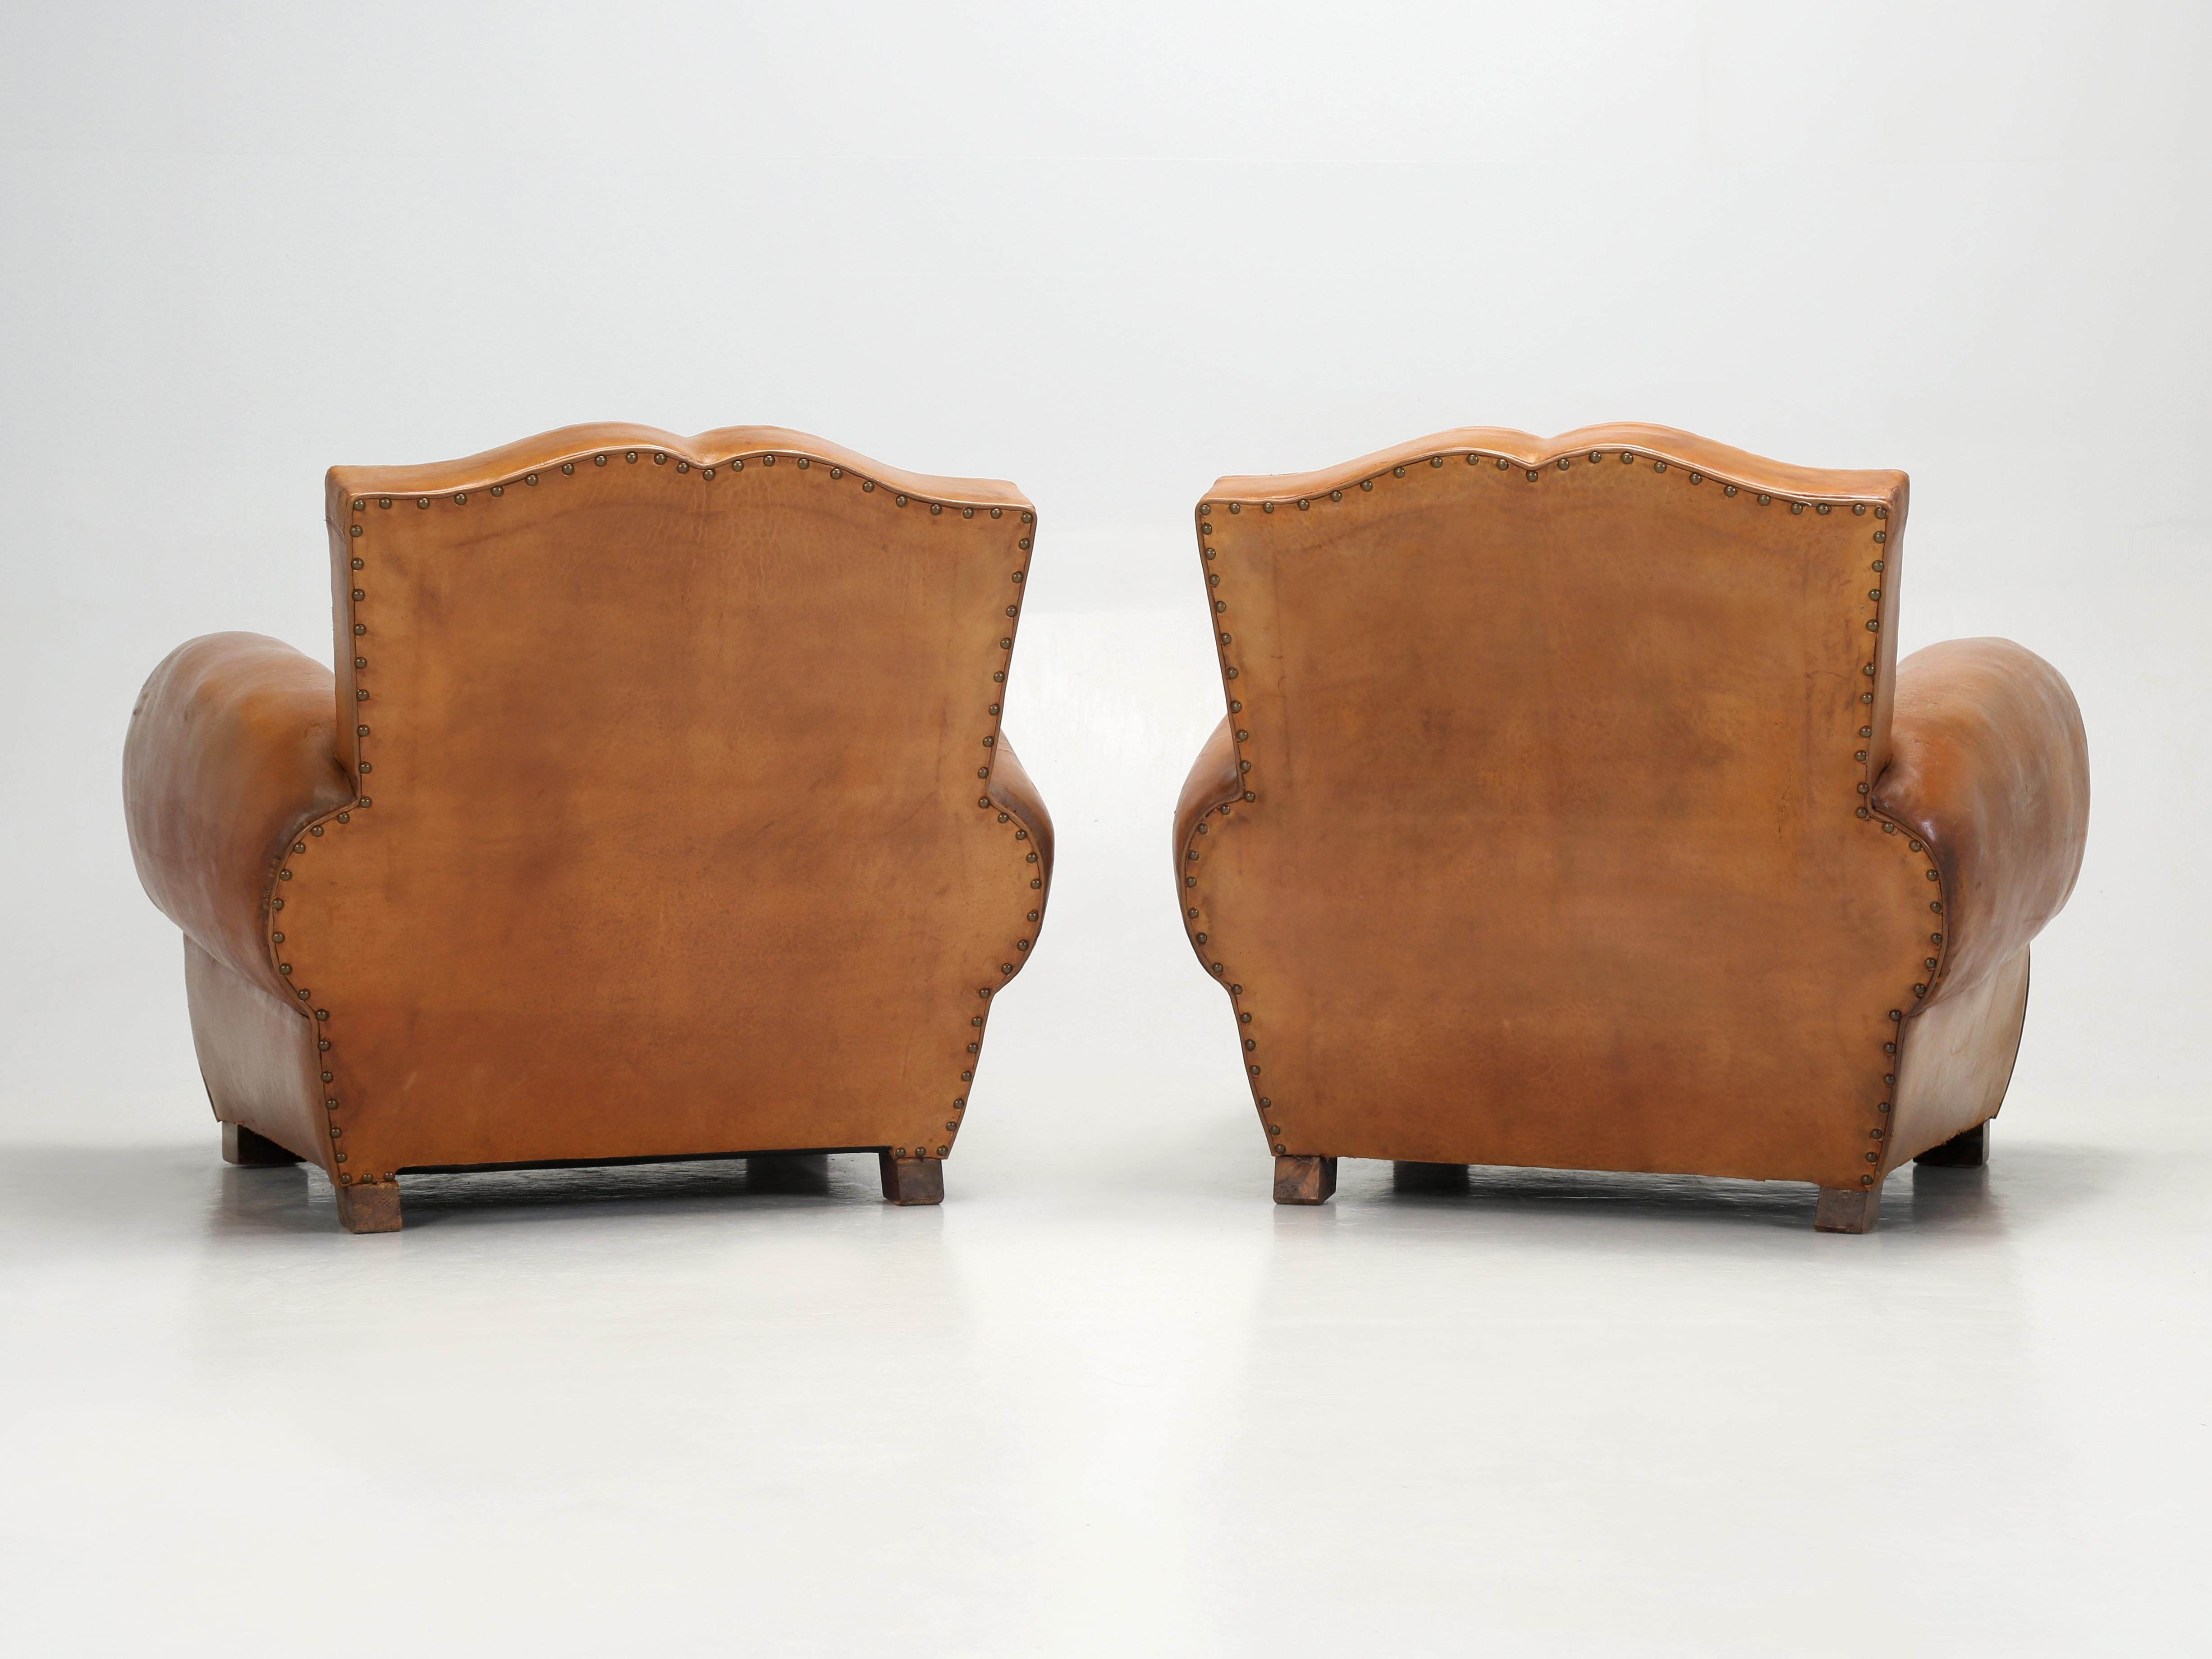 French Art Deco Moustache Original Leather Club Chairs Restored Inside, c1930s  13